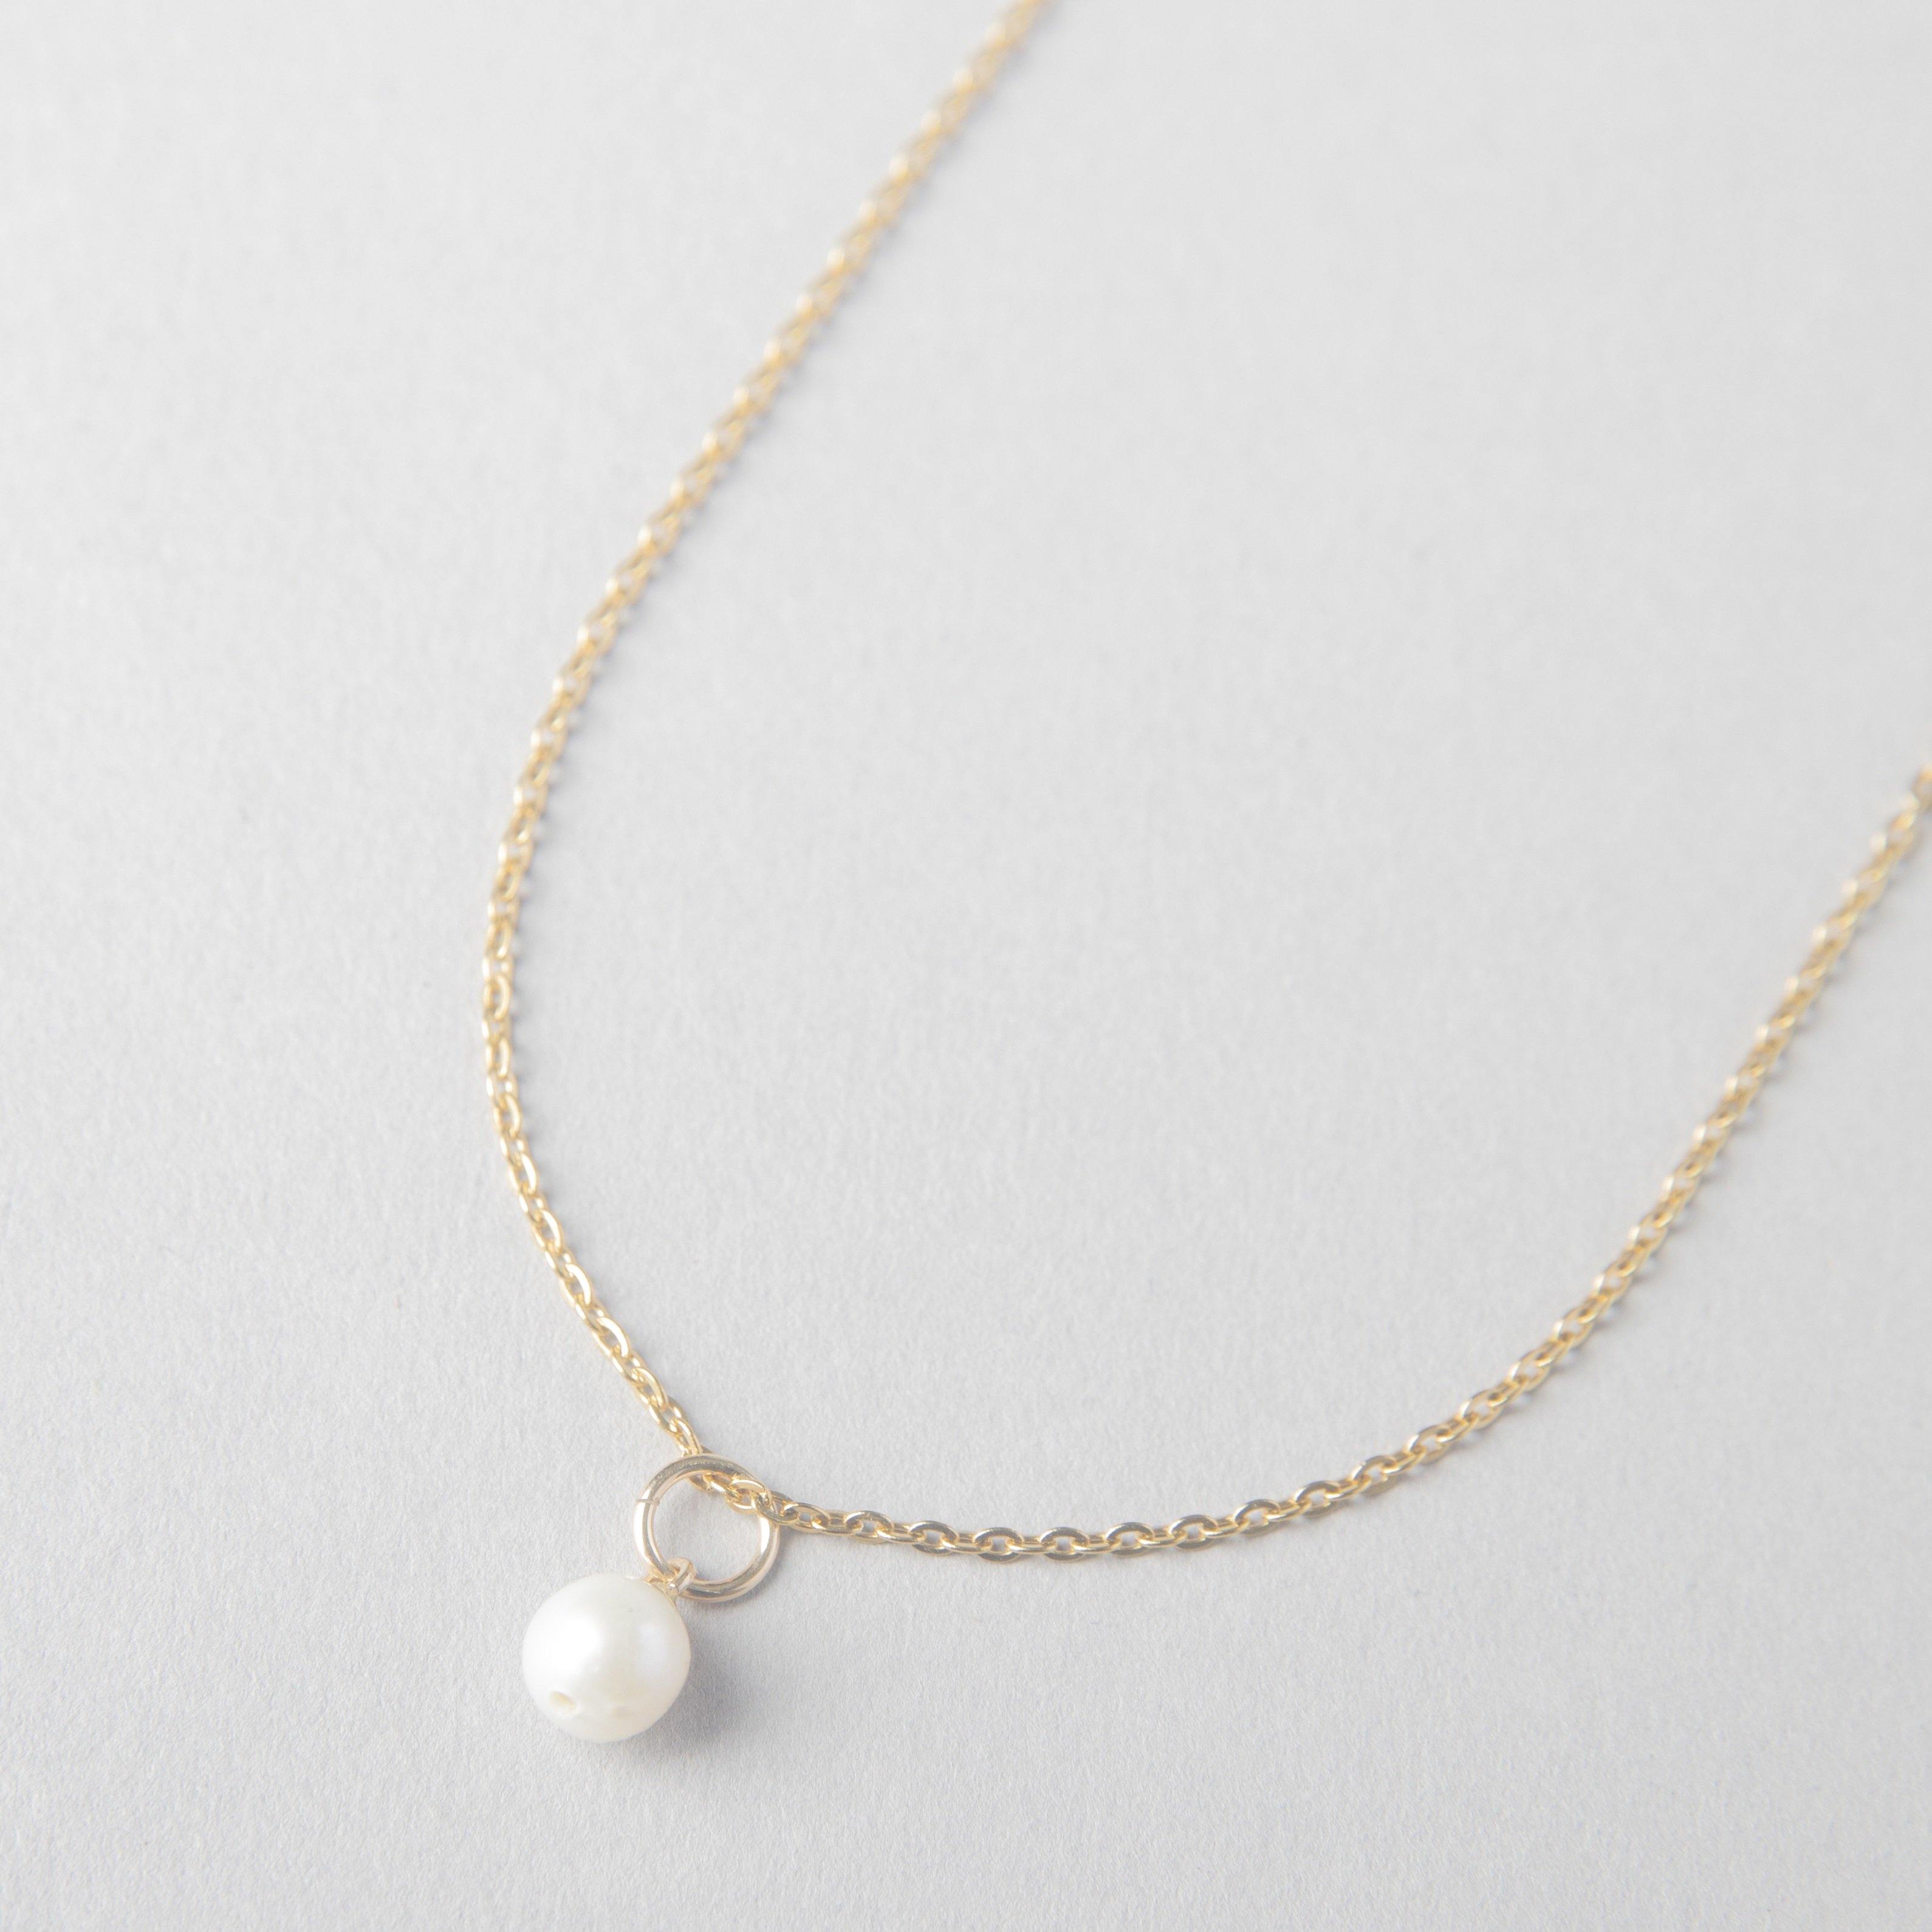 SOLO FRESHWATER PEARL NECKLACE - bobbie carr